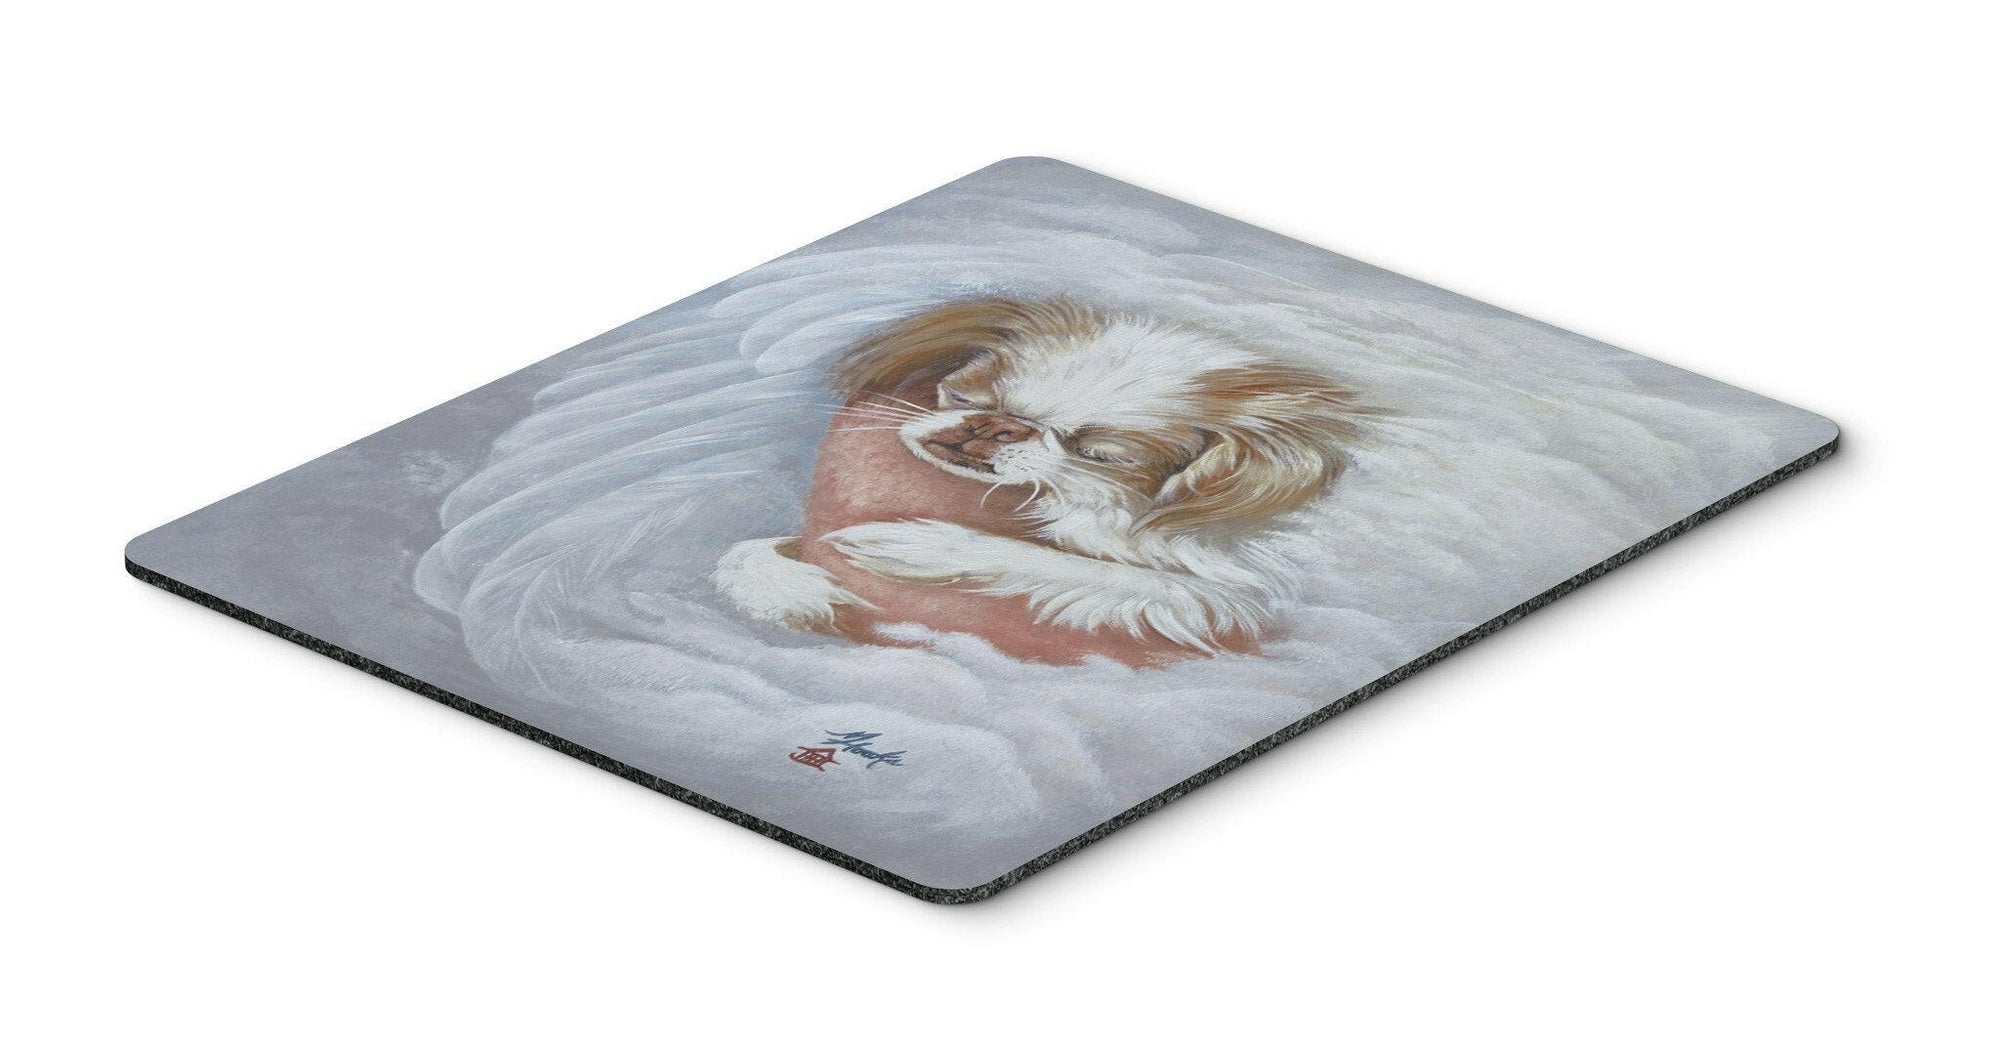 Japanese Chin in an Angels Arms Mouse Pad, Hot Pad or Trivet MH1037MP by Caroline's Treasures